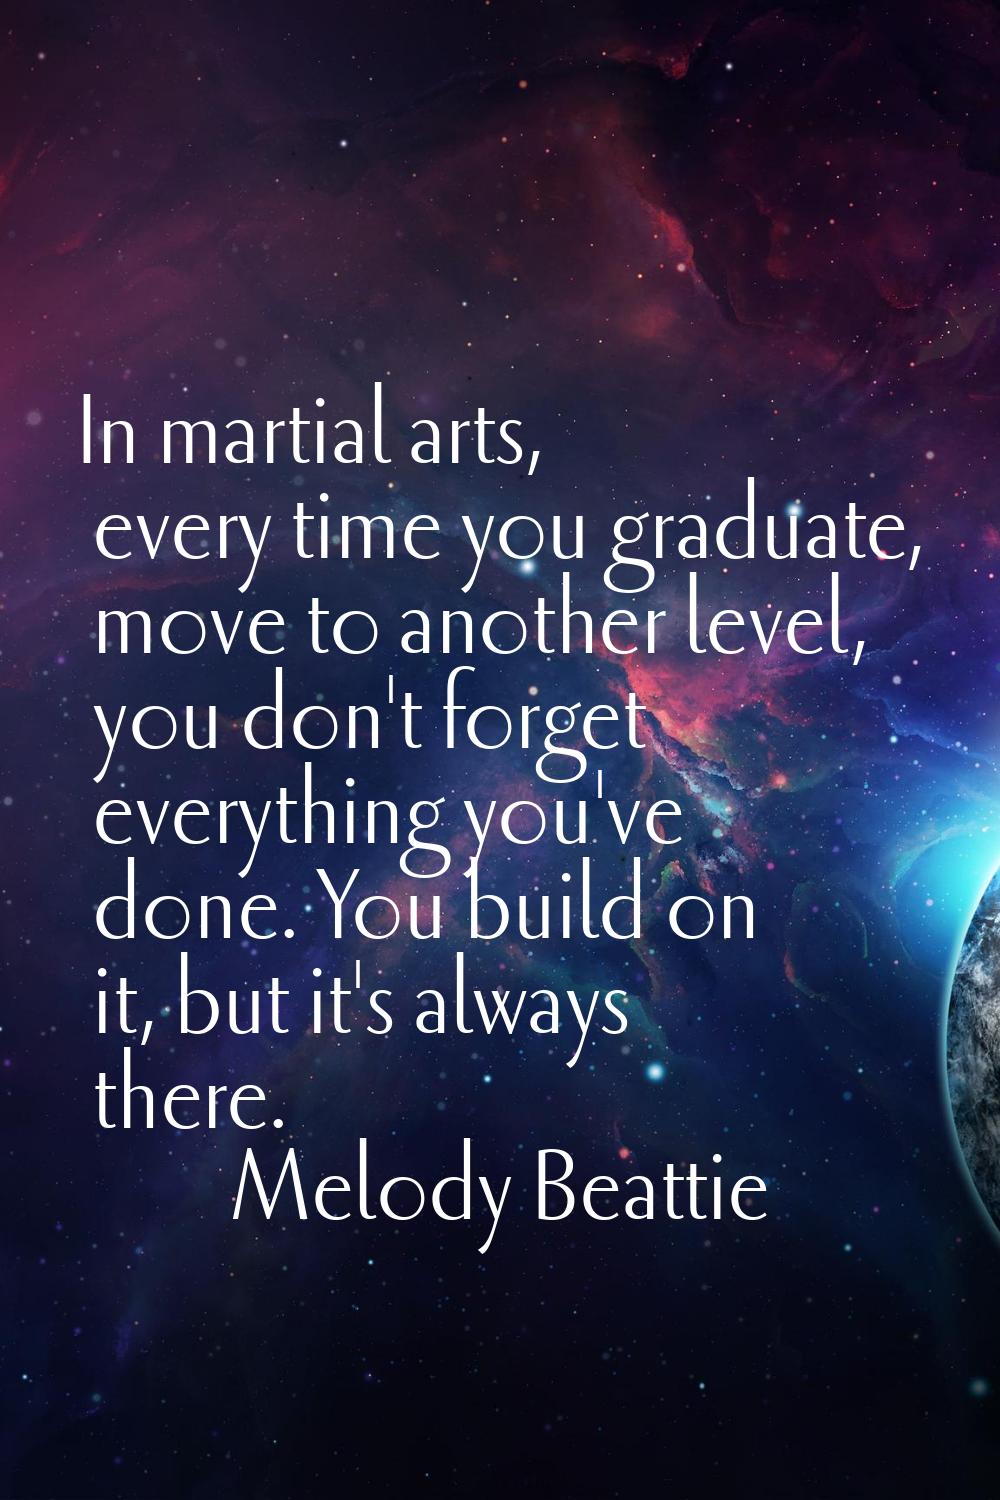 In martial arts, every time you graduate, move to another level, you don't forget everything you've